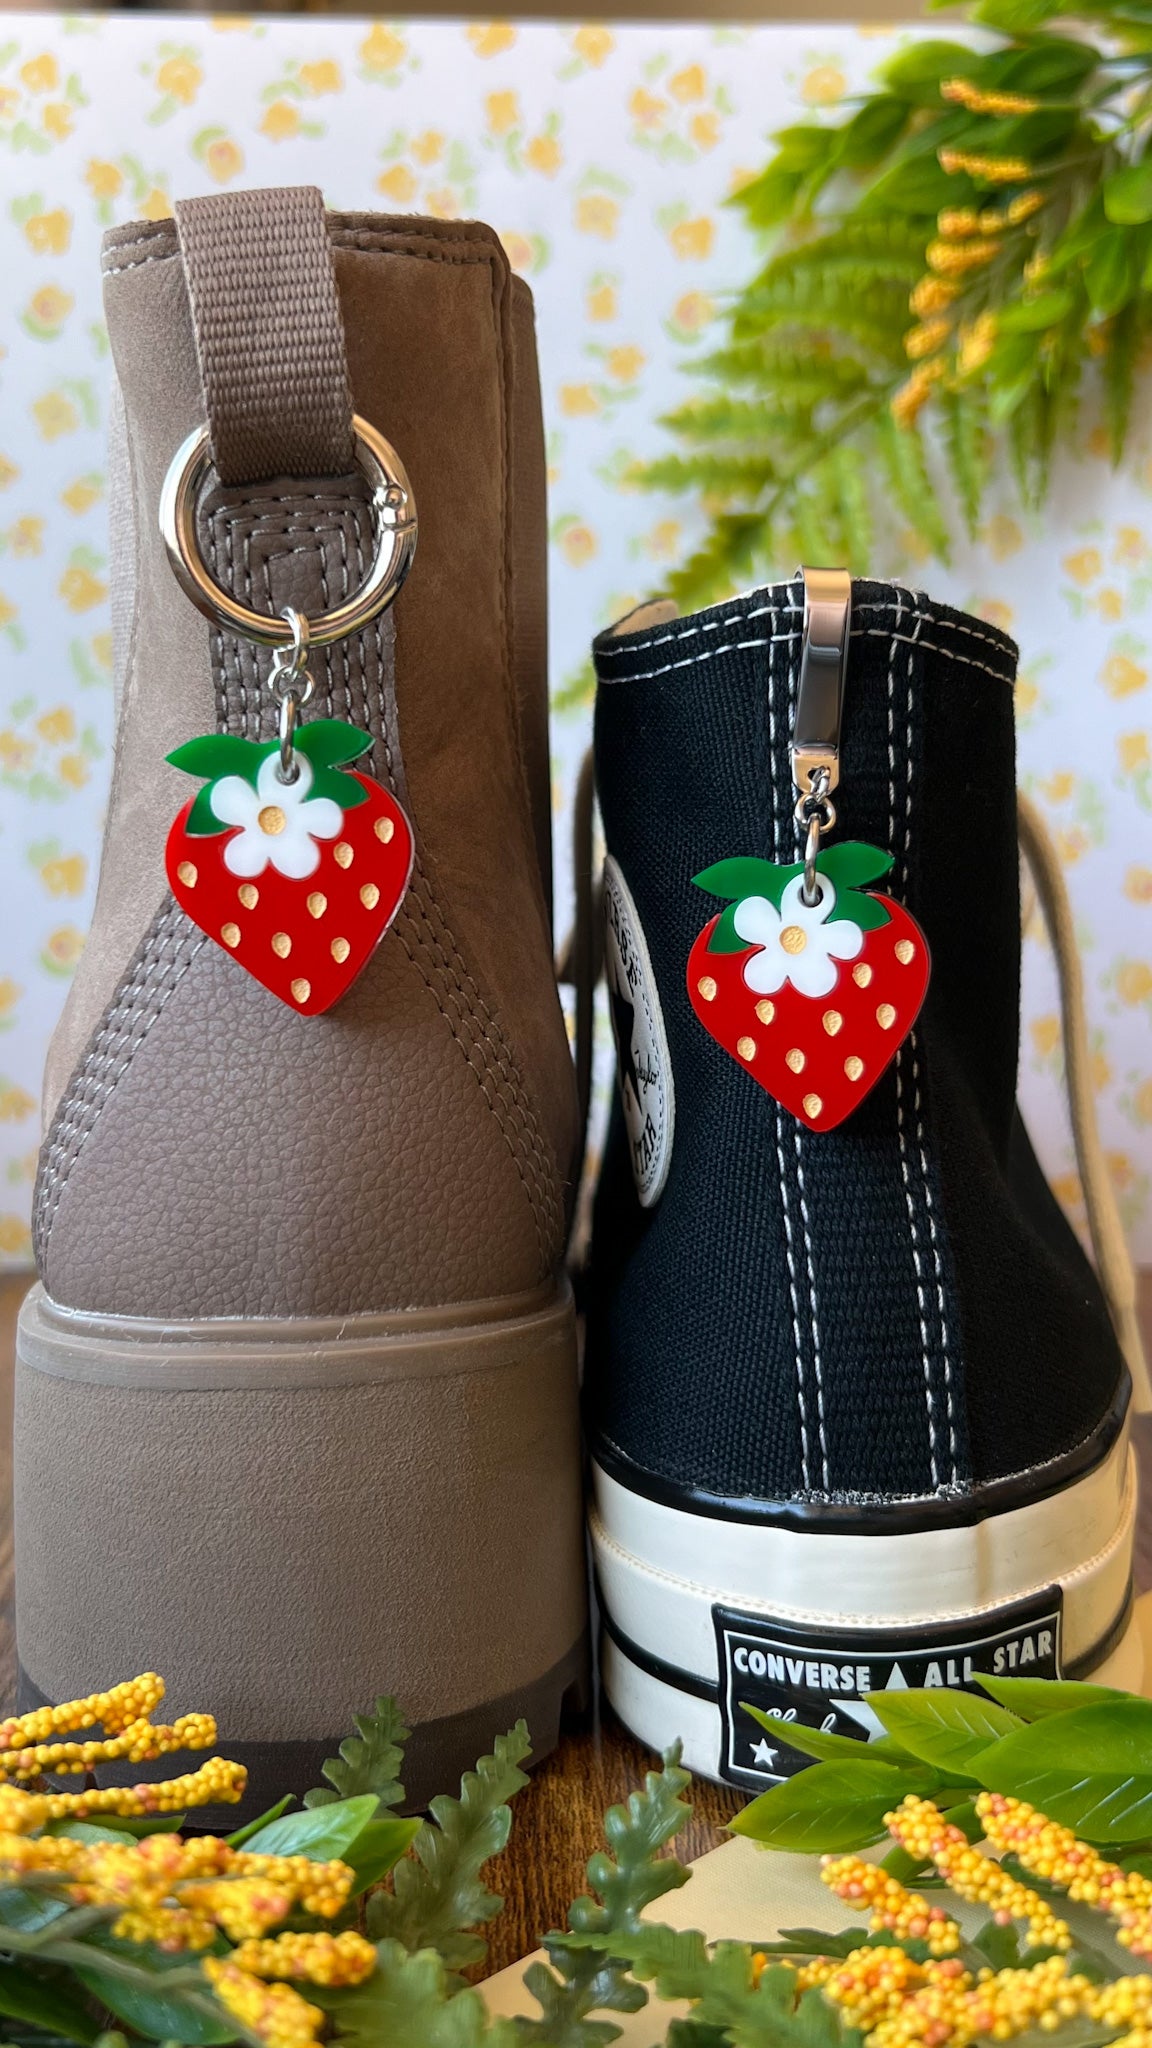 Strawberry Blossom Shoe Accessory | Pull Loop, Shoe Charm, High Top Sneaker or Boot Clip, Shoe or Bag Accessory